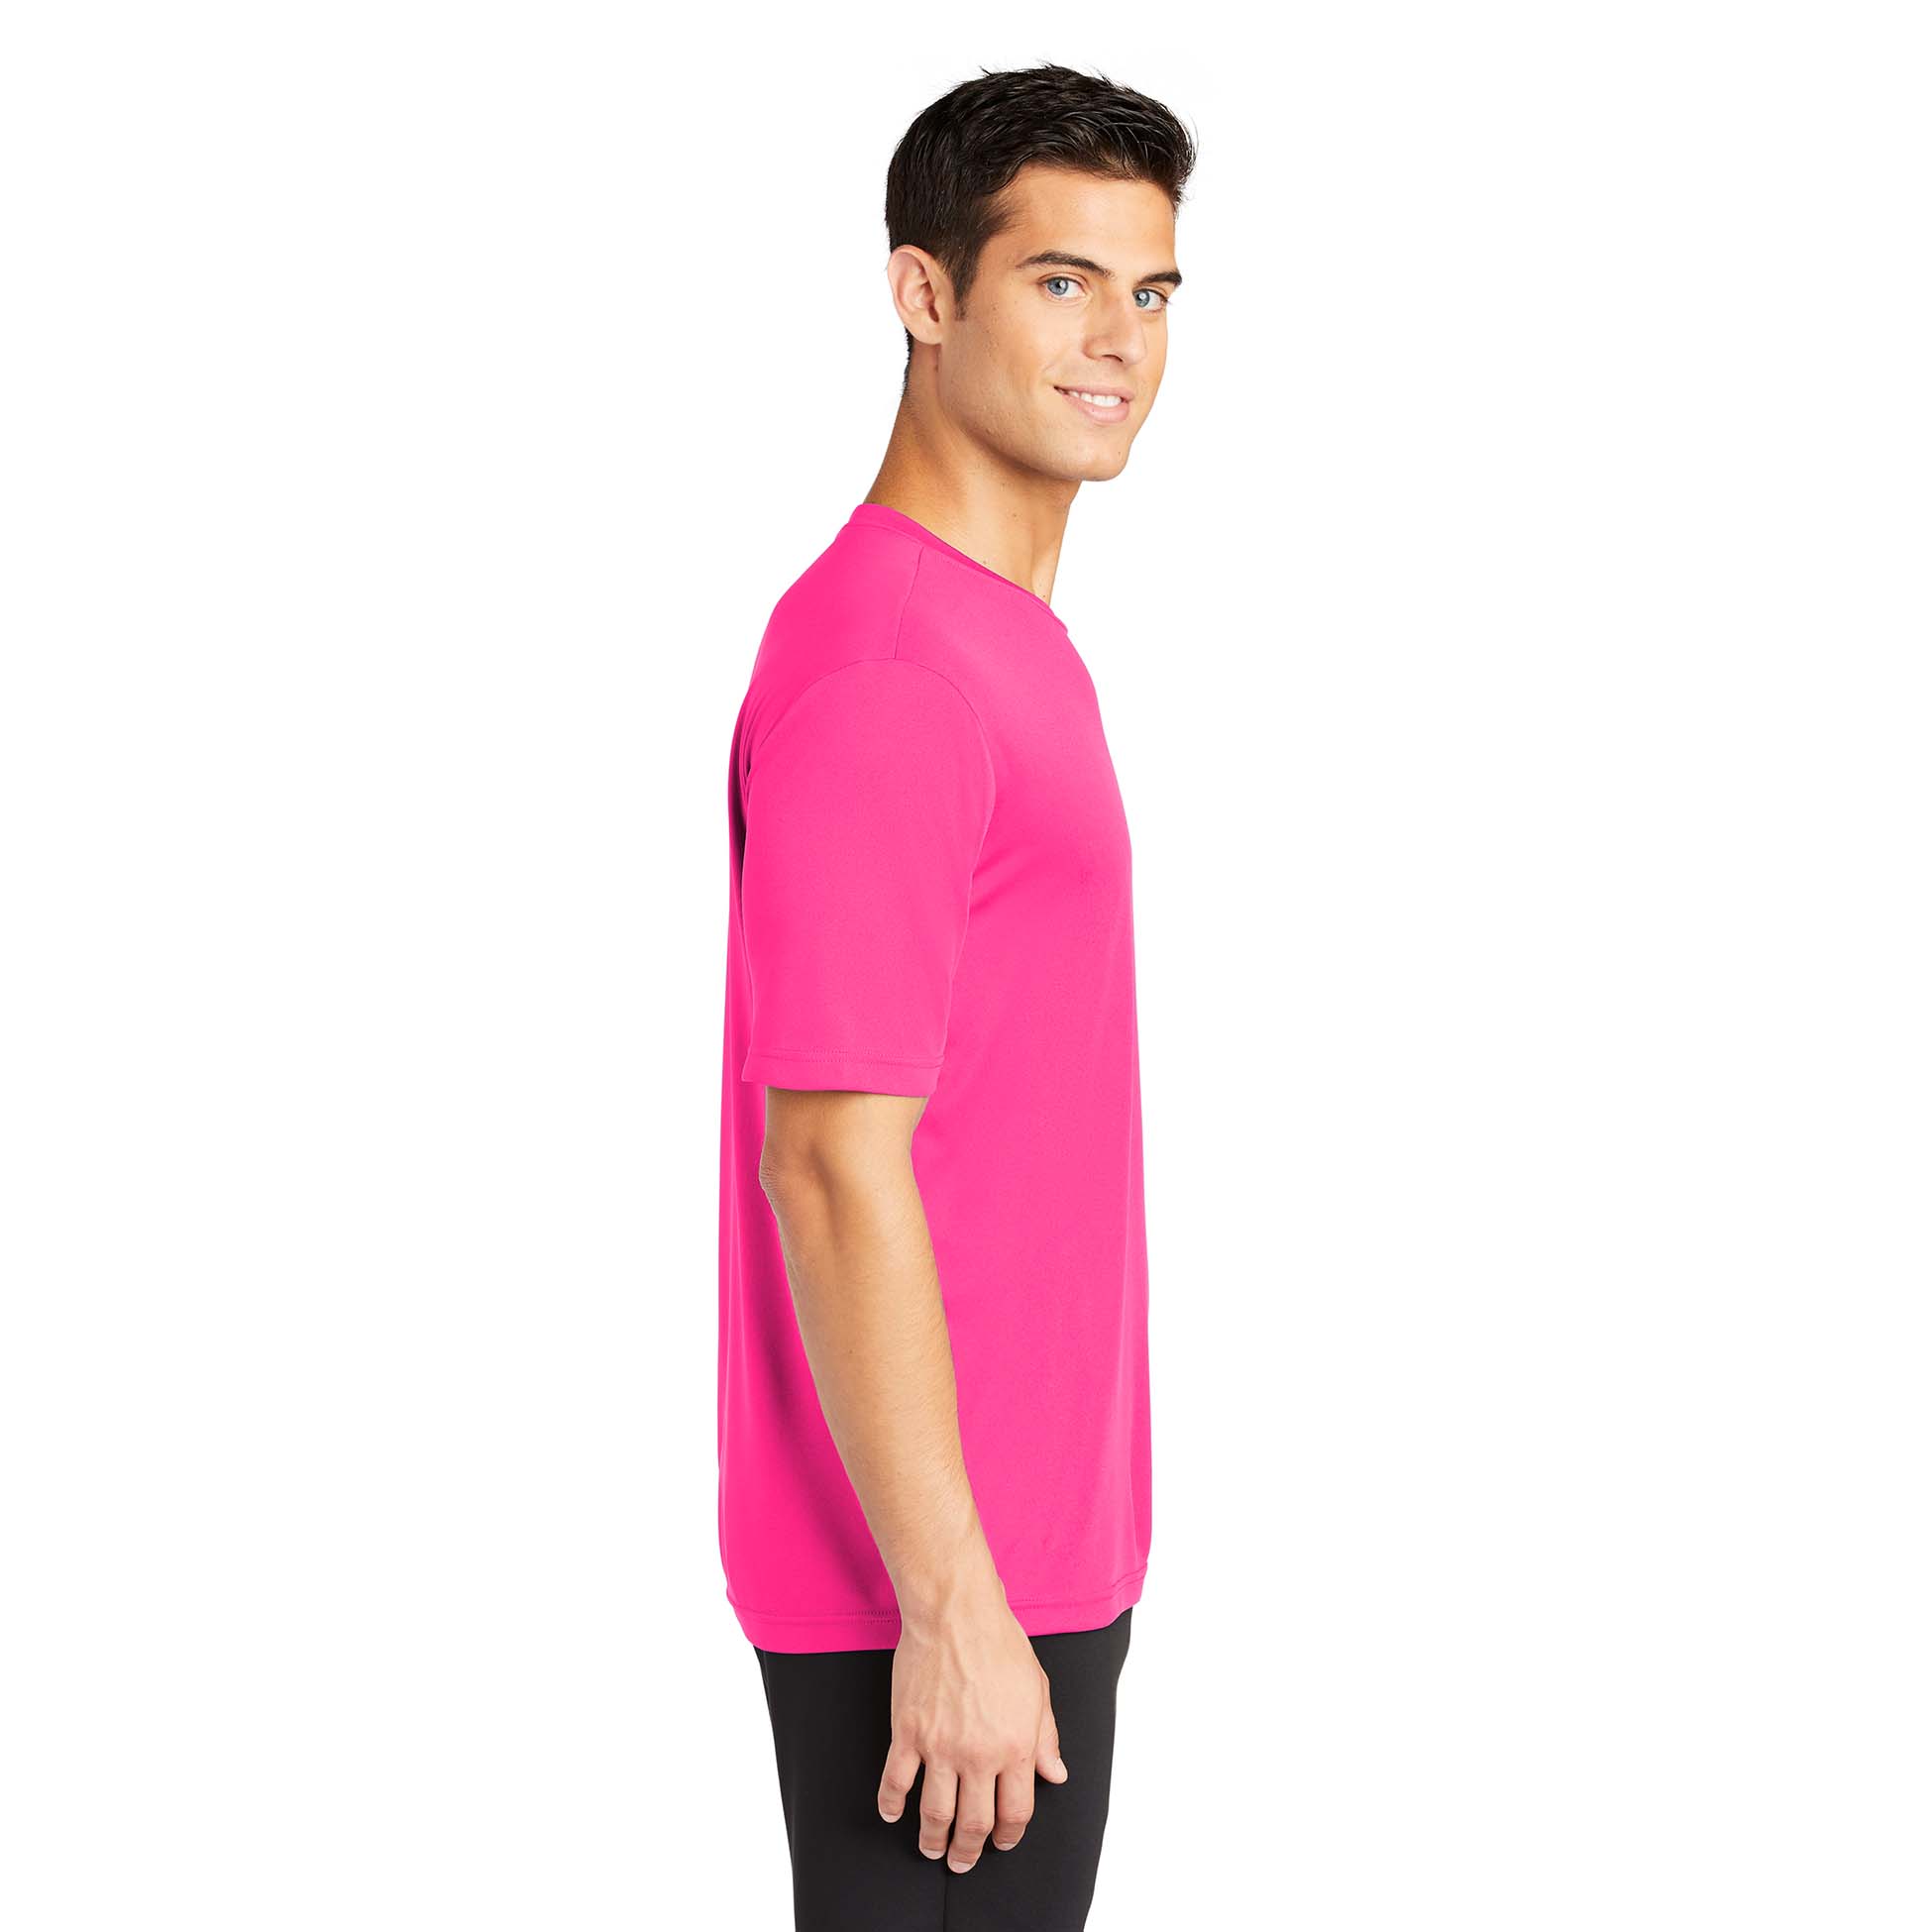 Tee Sport-Tek ST350 Competitor - Pink Source Neon PosiCharge | Full